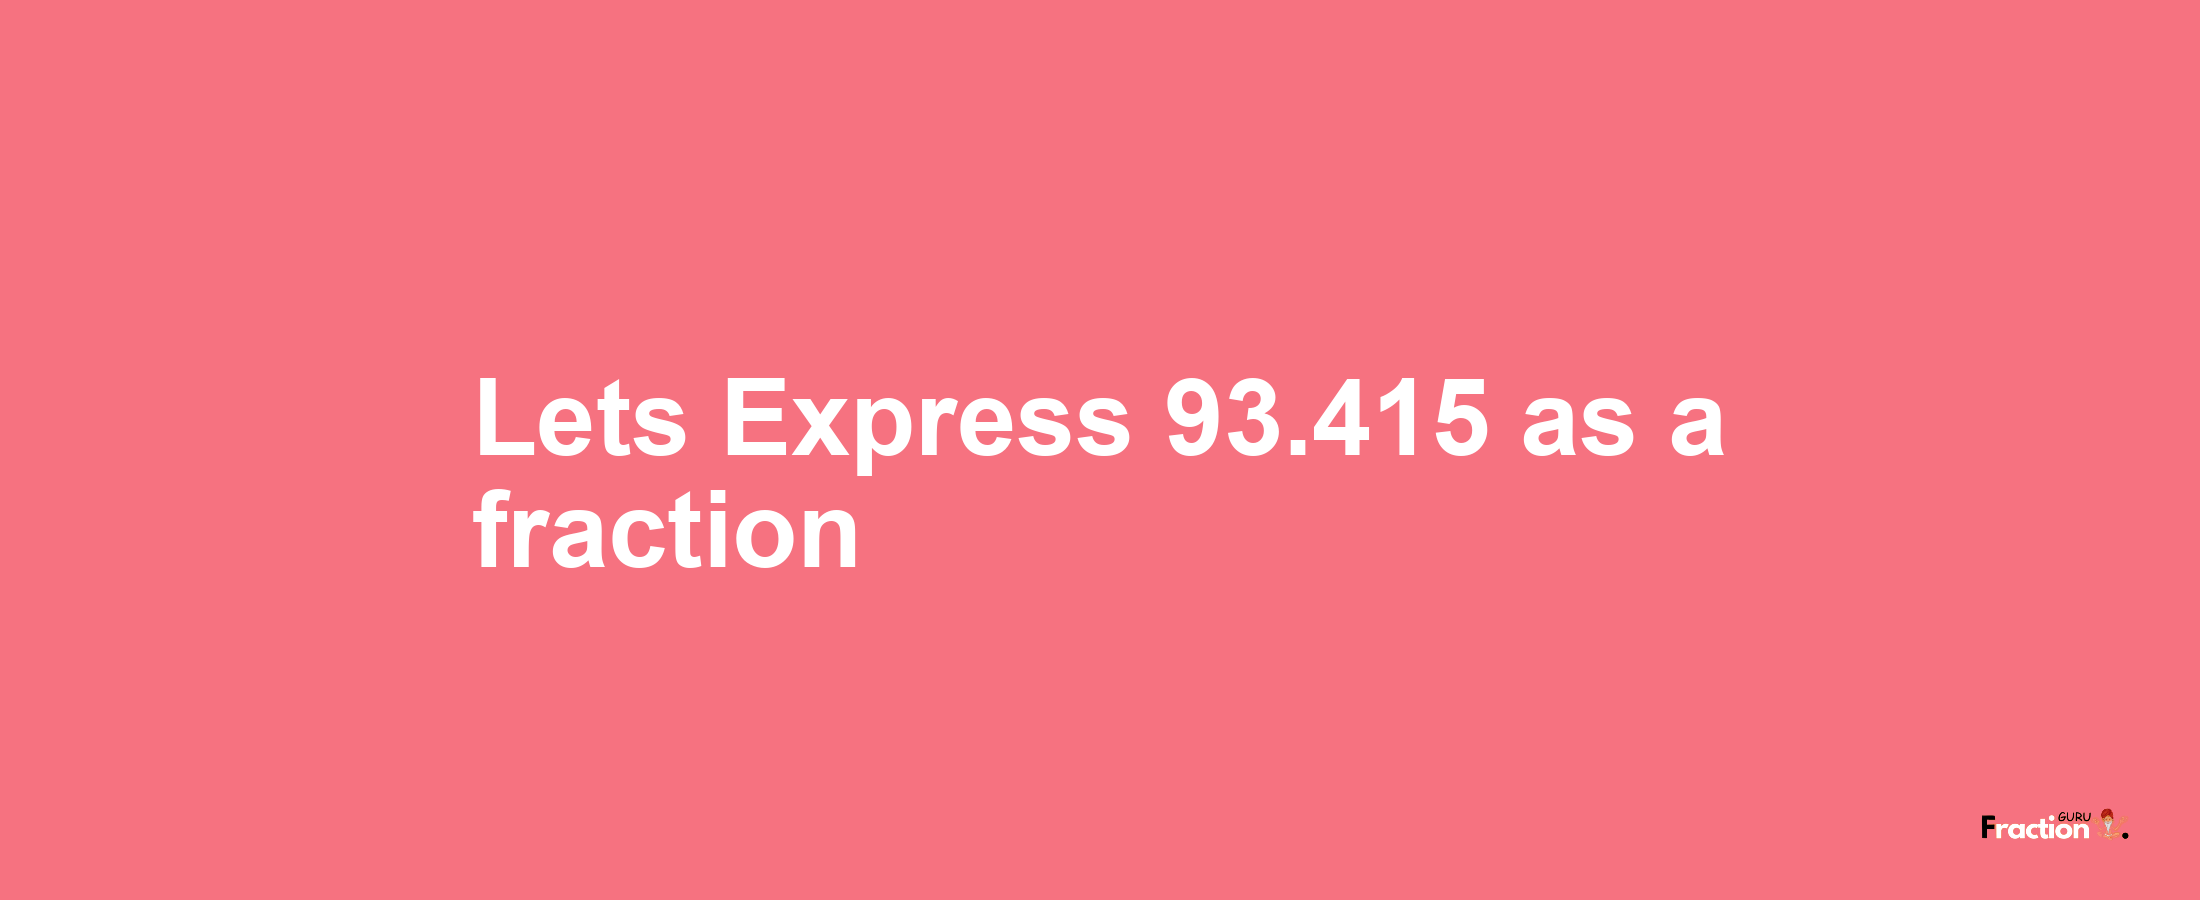 Lets Express 93.415 as afraction